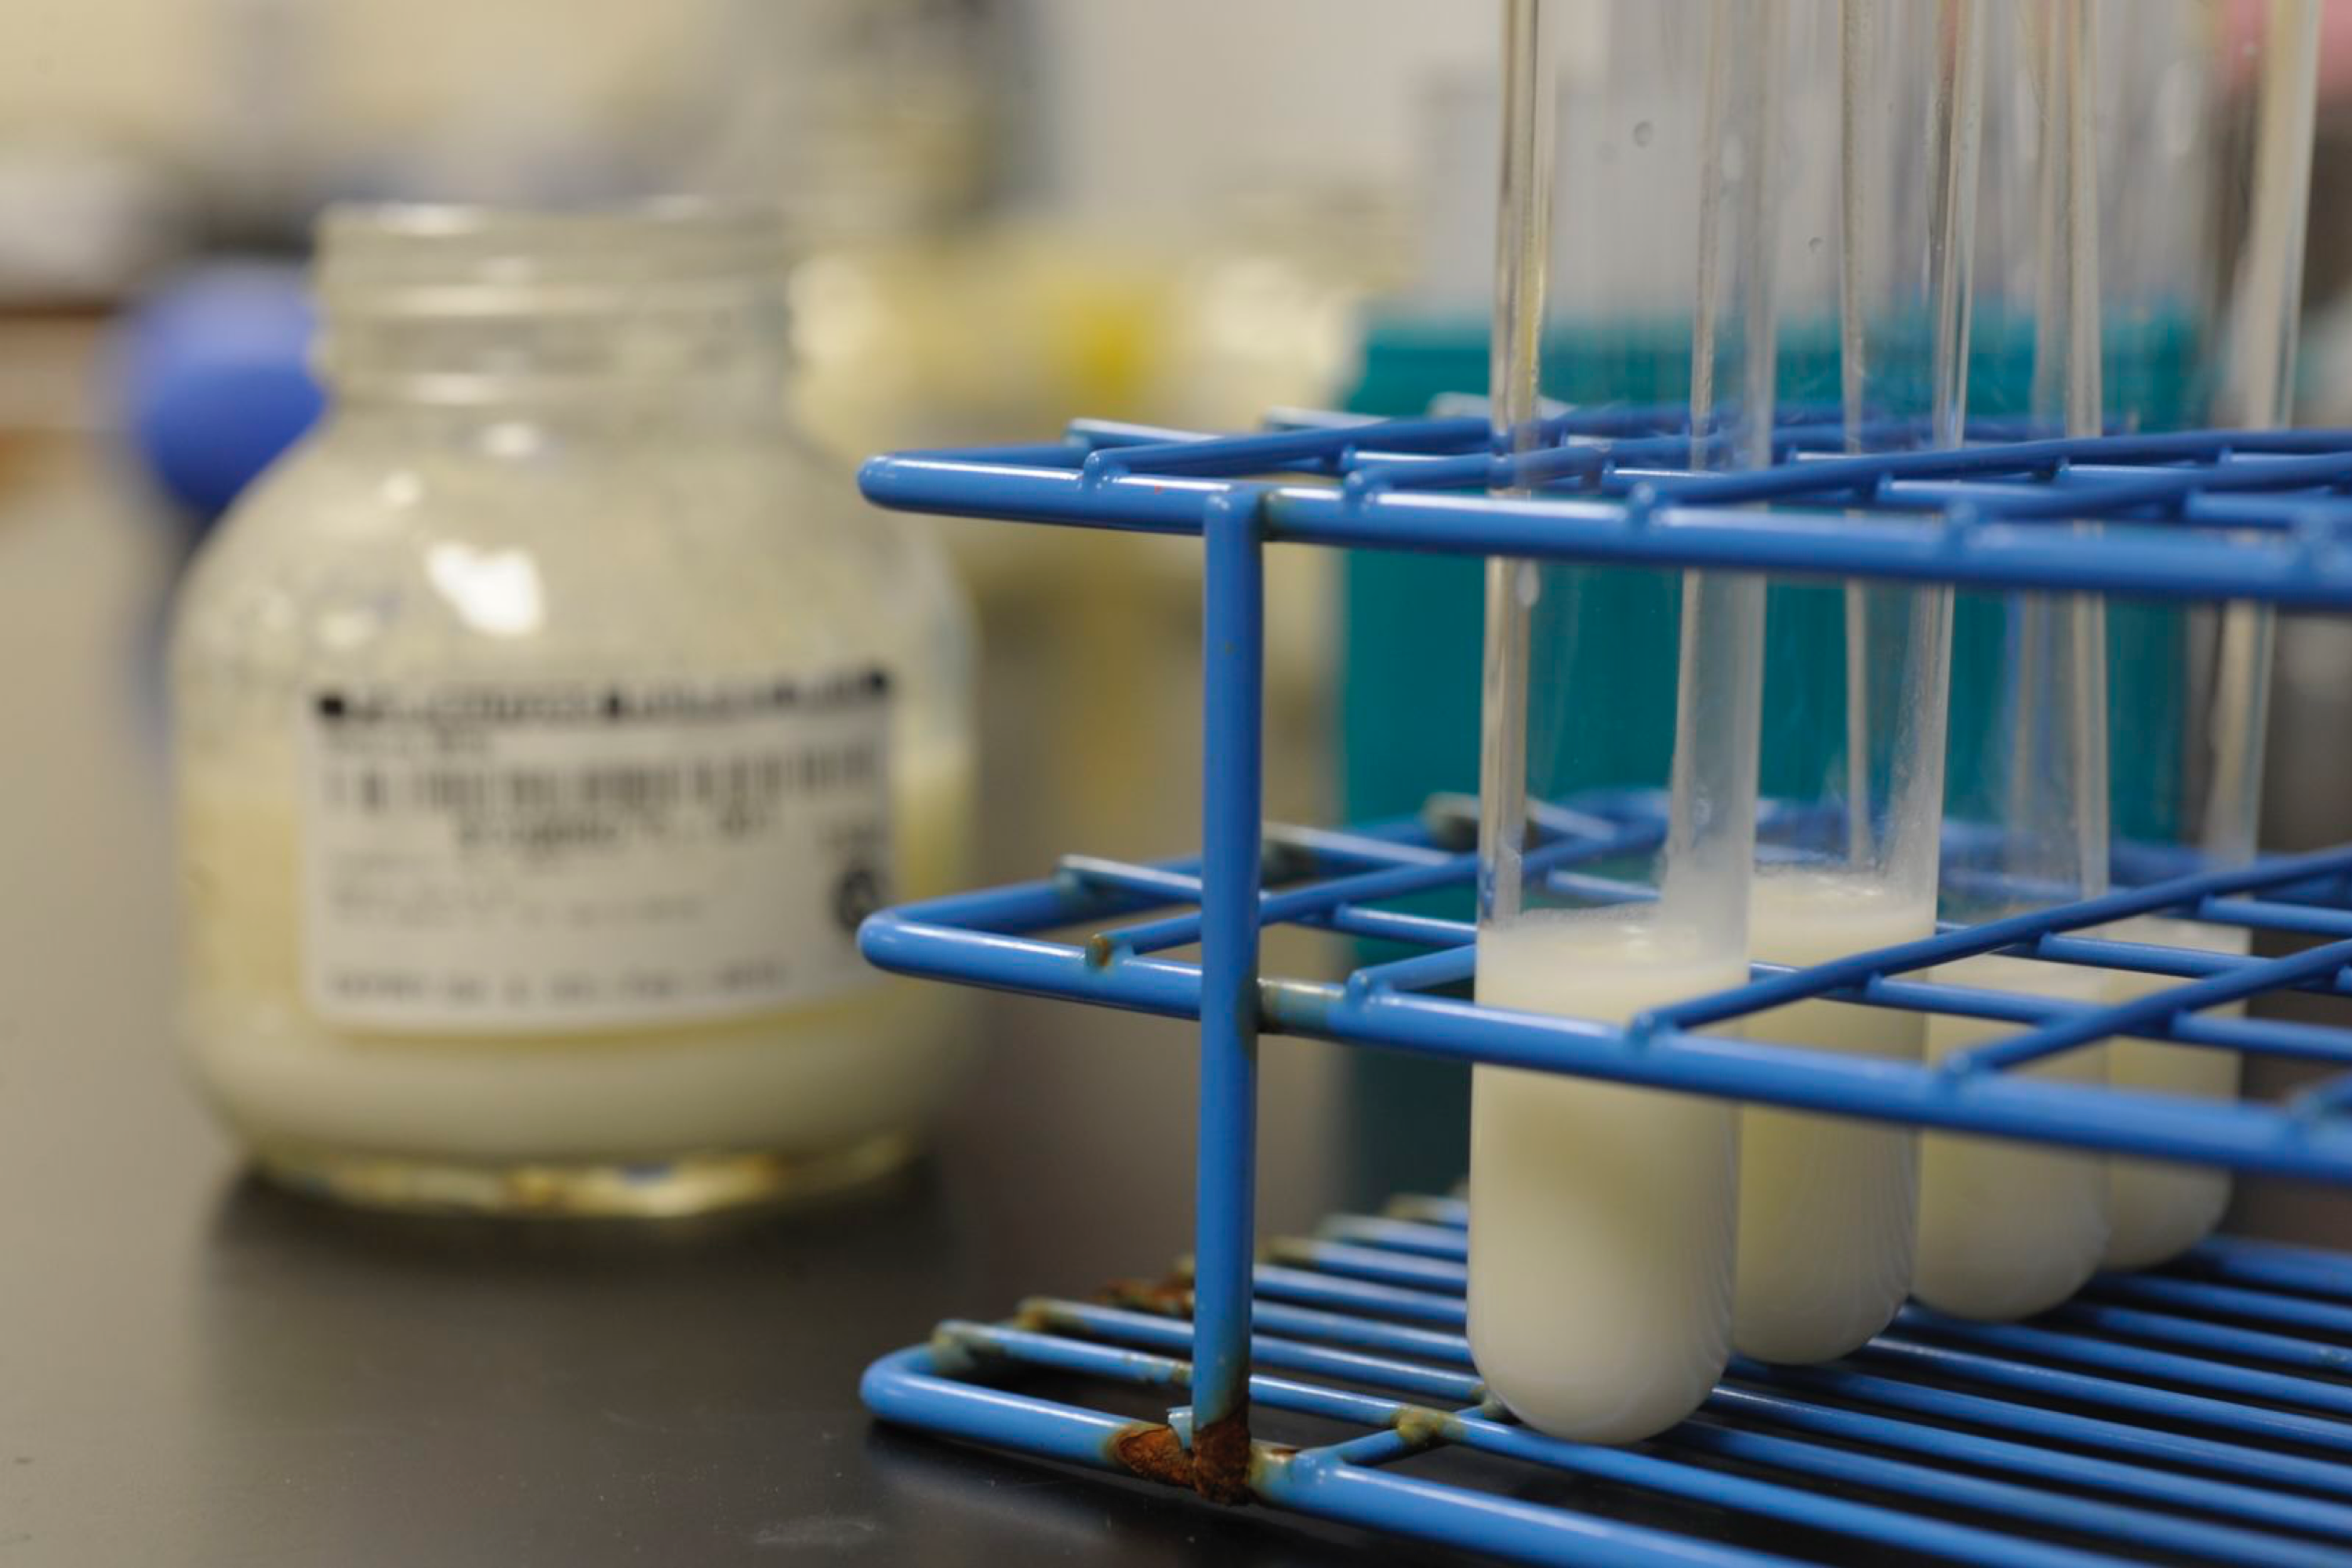 Human milk research samples in test tubes on a lab bench.